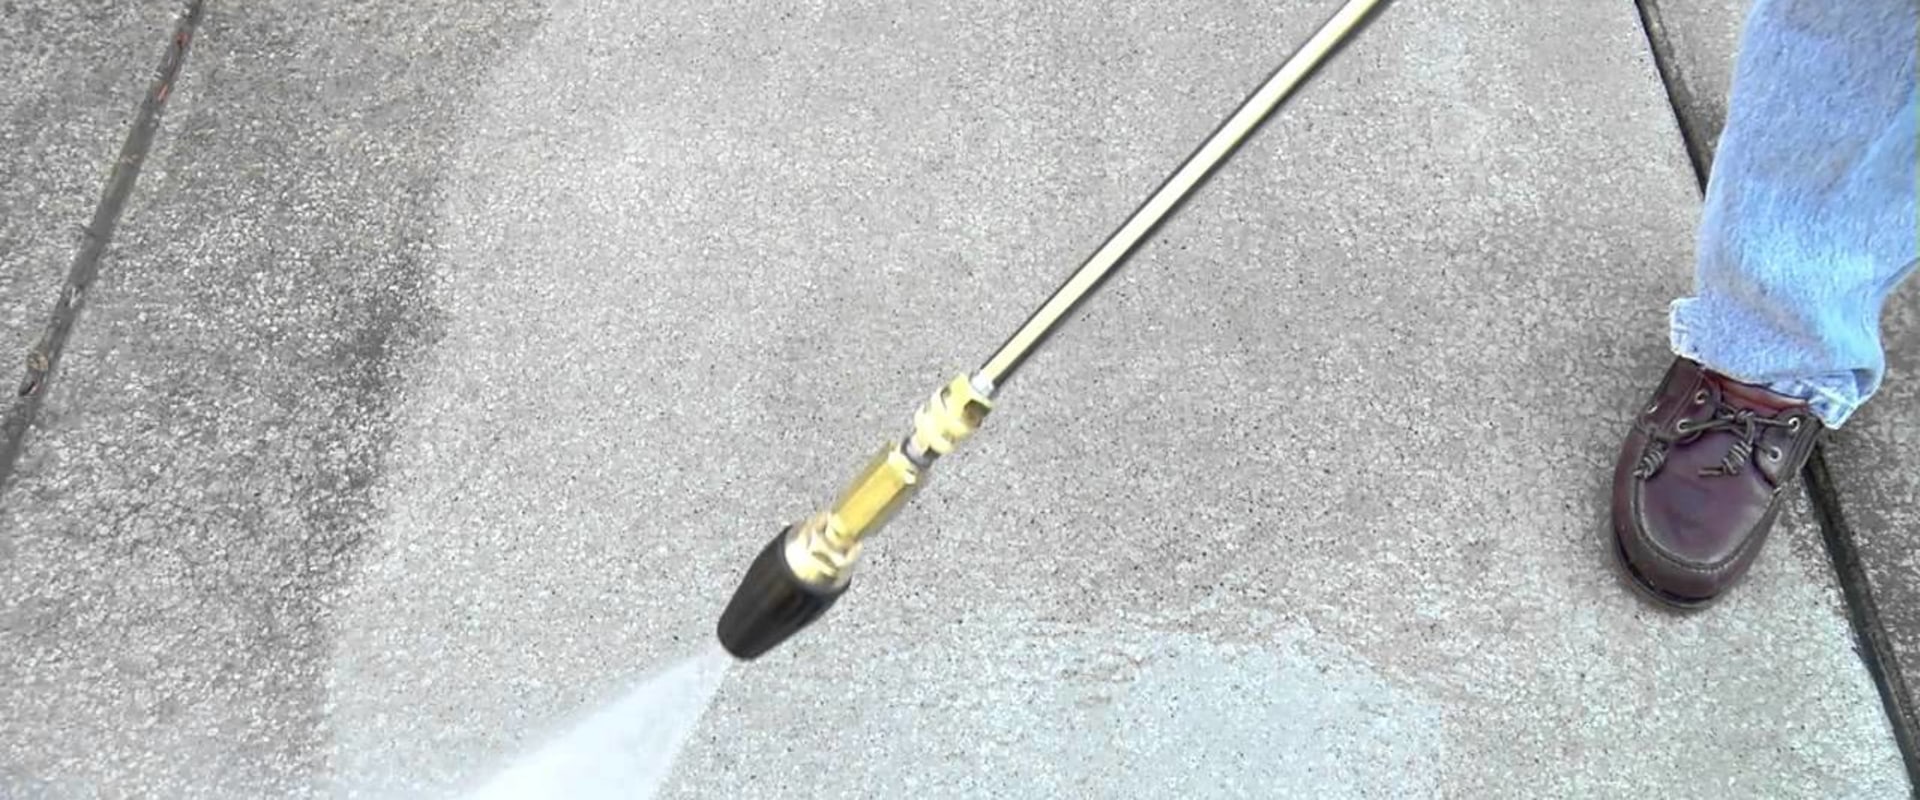 What does a rotating nozzle do for a pressure washer?